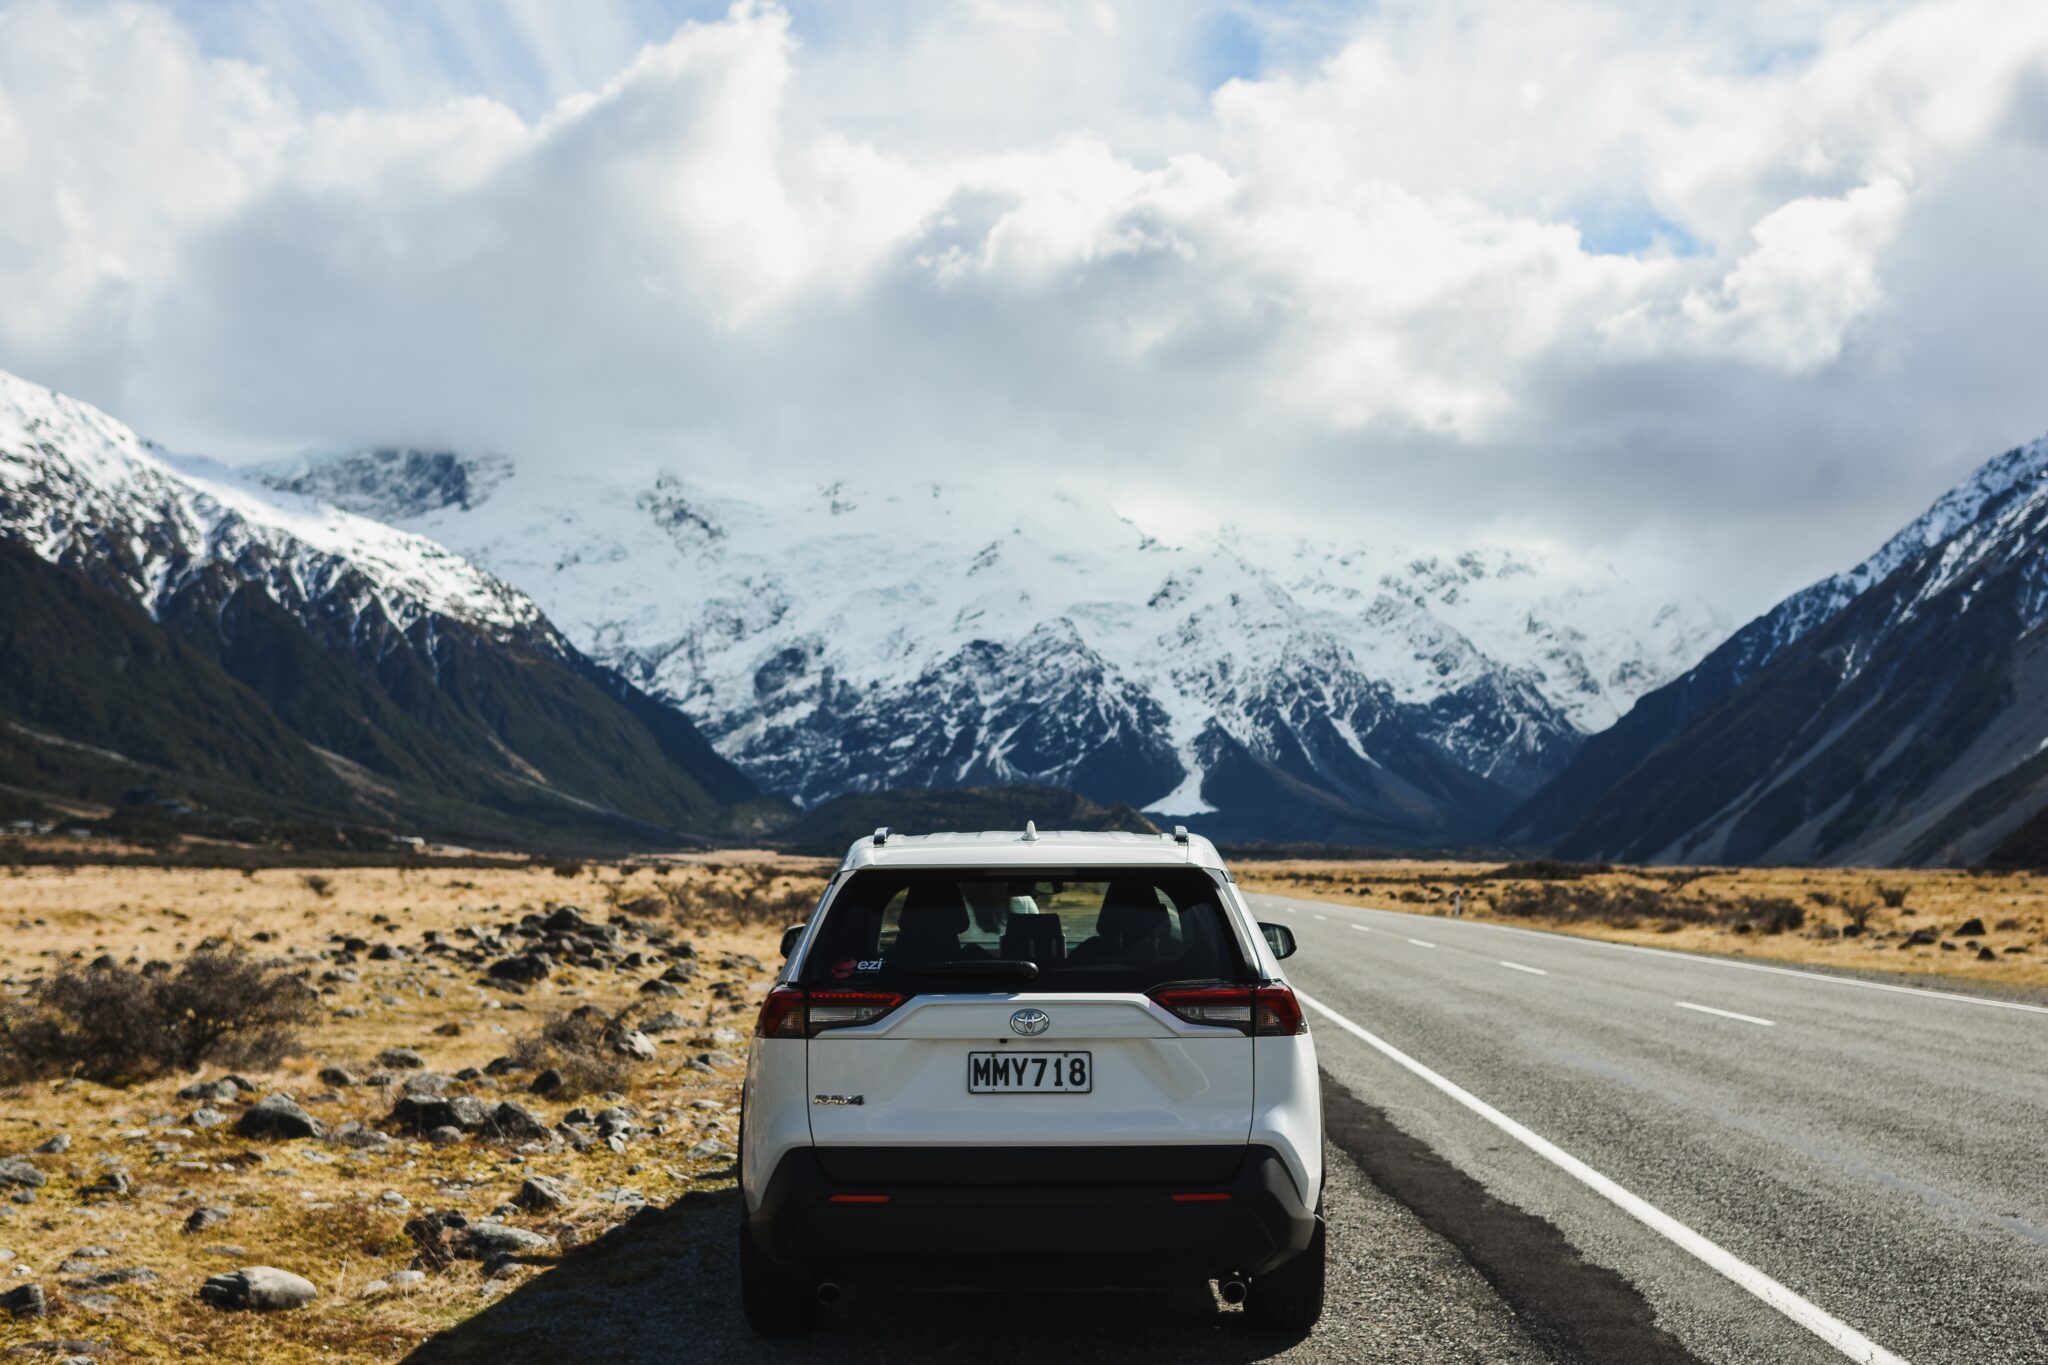 Car on the side of the road facing white capped mountains